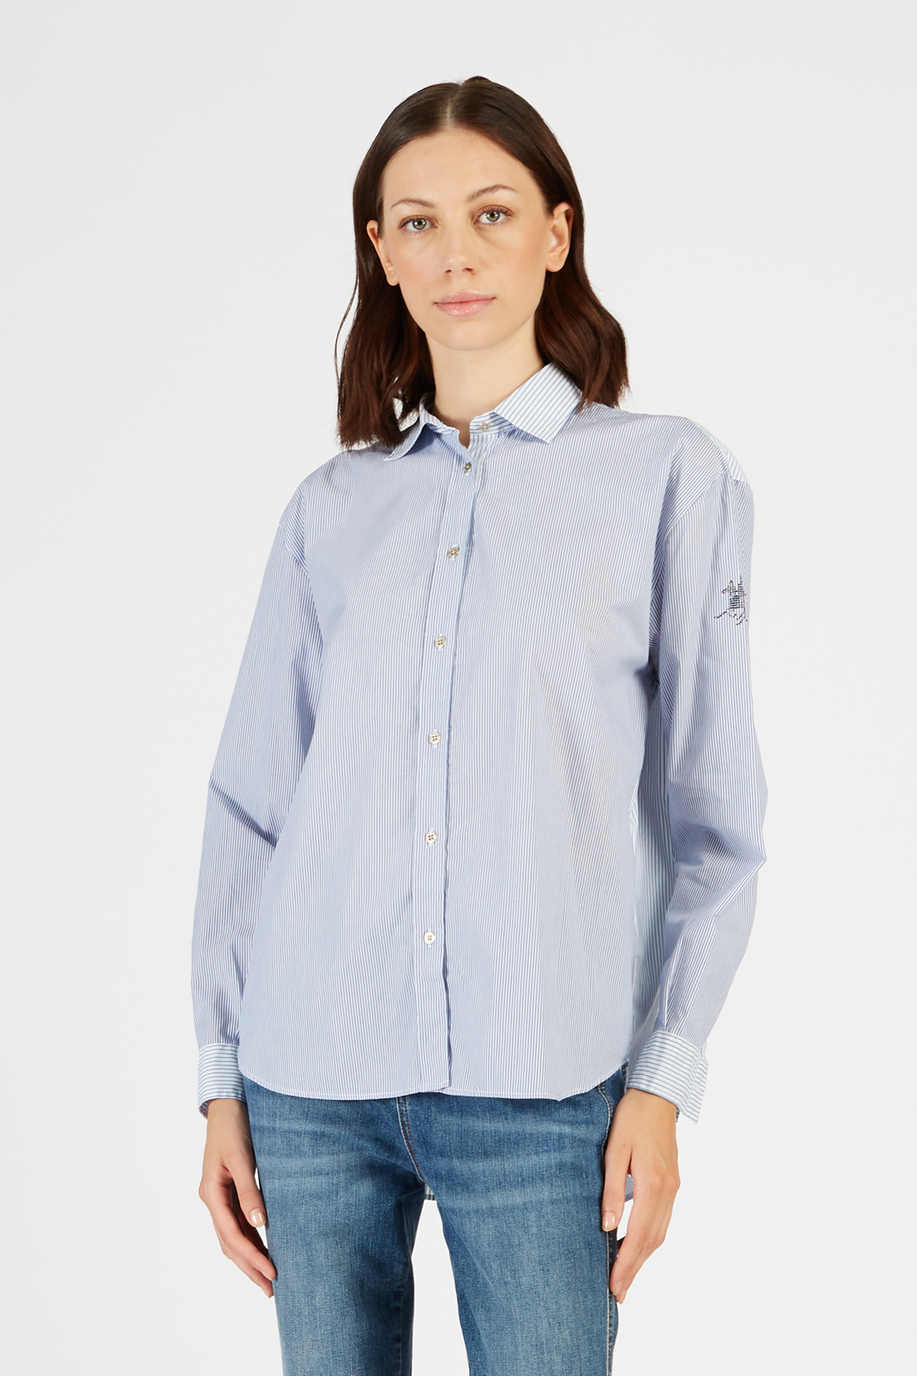 Camicia donna Timeless a righe in cotone maniche lunghe regular fit - Business Look donna | La Martina - Official Online Shop